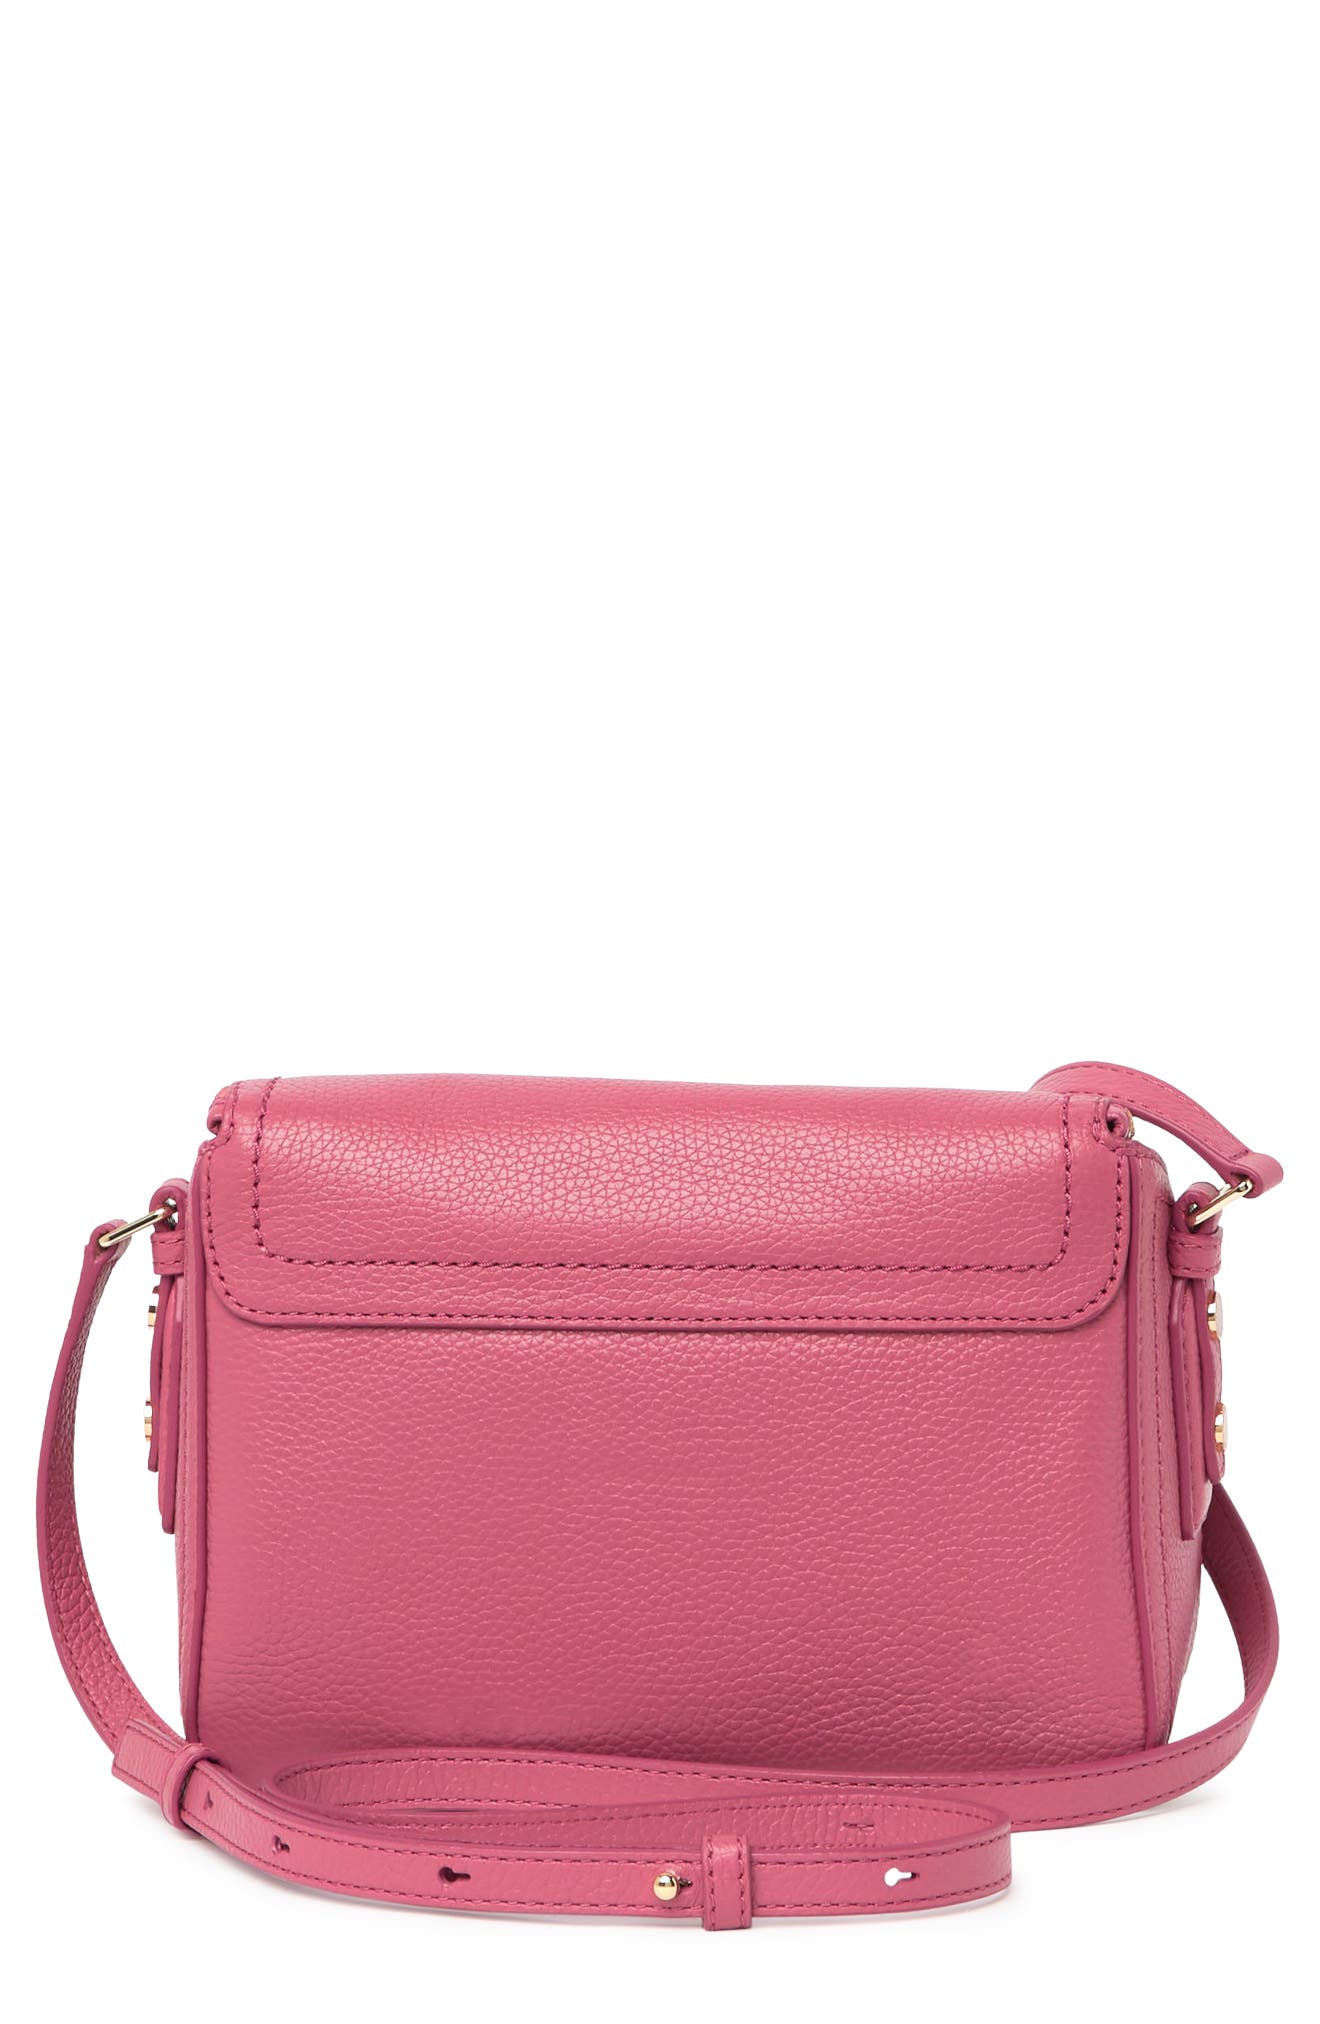 Marc Jacobs | The Groove Leather Mini Messenger Bag | Nordstrom Rack